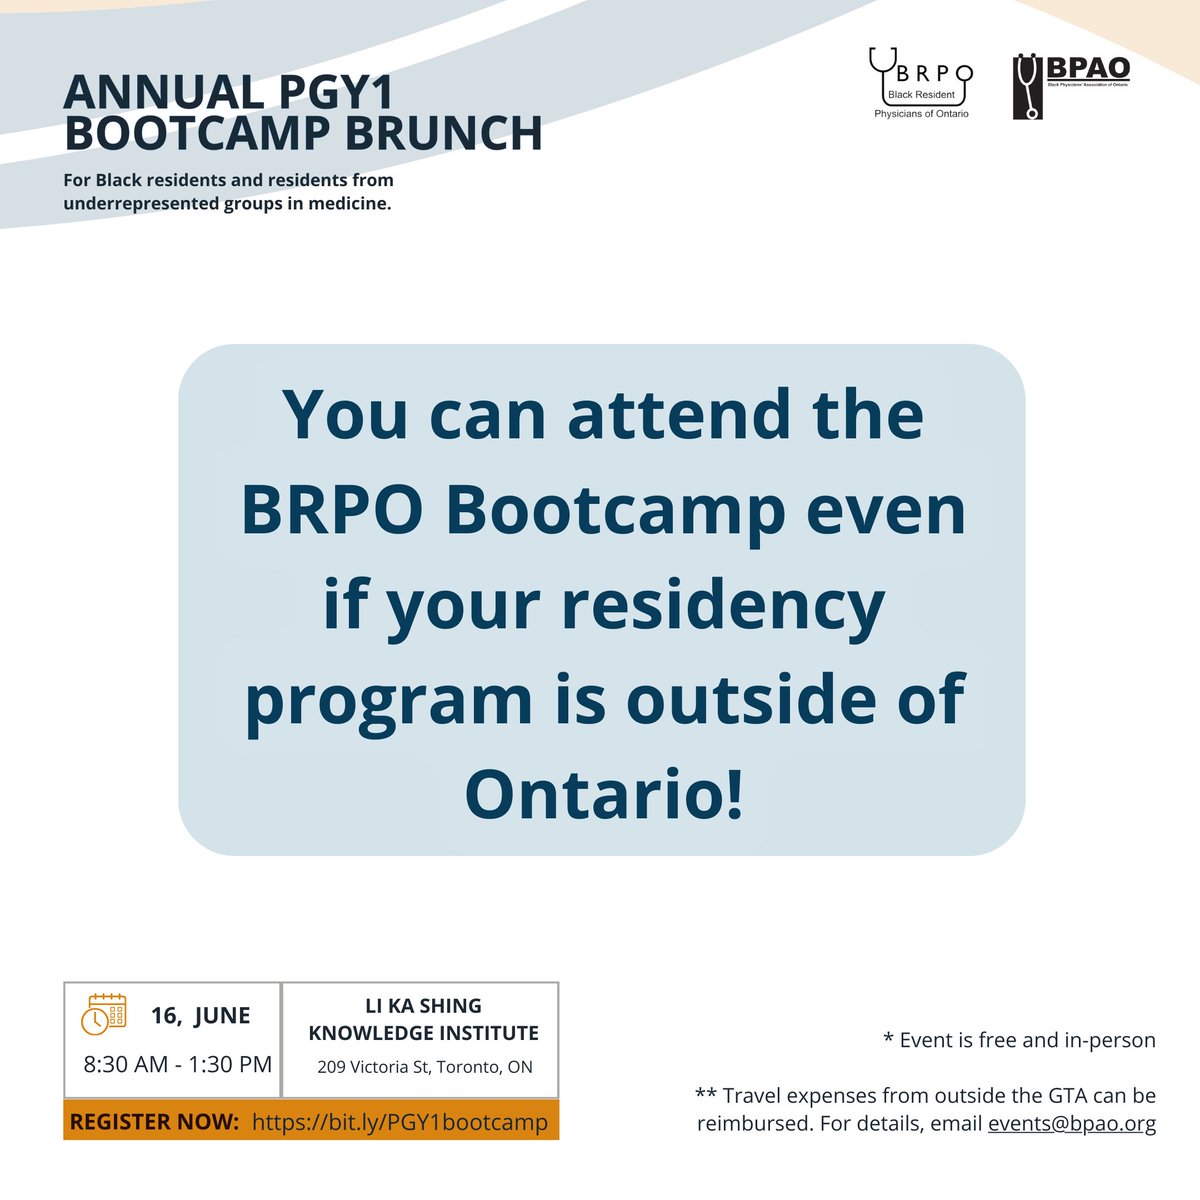 We are excited to announce that registration for the BRPO Bootcamp is now open to all new residents, even if your residency program is outside of Ontario! To register: loom.ly/azzL-bM 🚗 Attendees traveling from outside the GTA can have their travel expenses reimbursed.